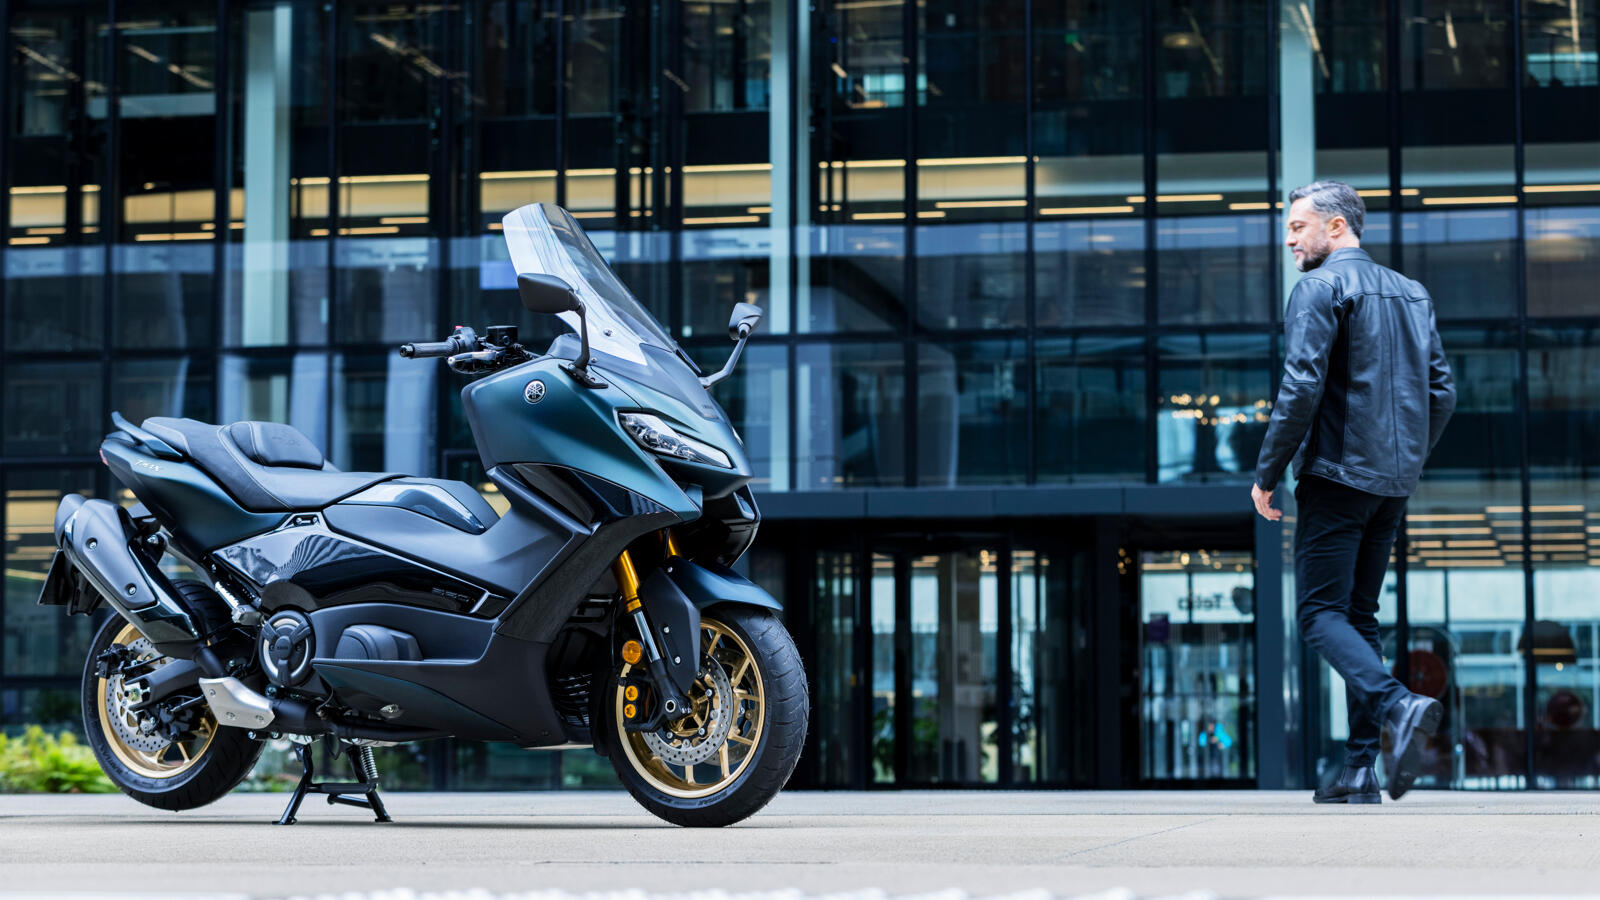 2022 Yamaha TMax 560 Tech Max in Malaysia, RM74,998 for CKD, Garmin  navigation by subscription 